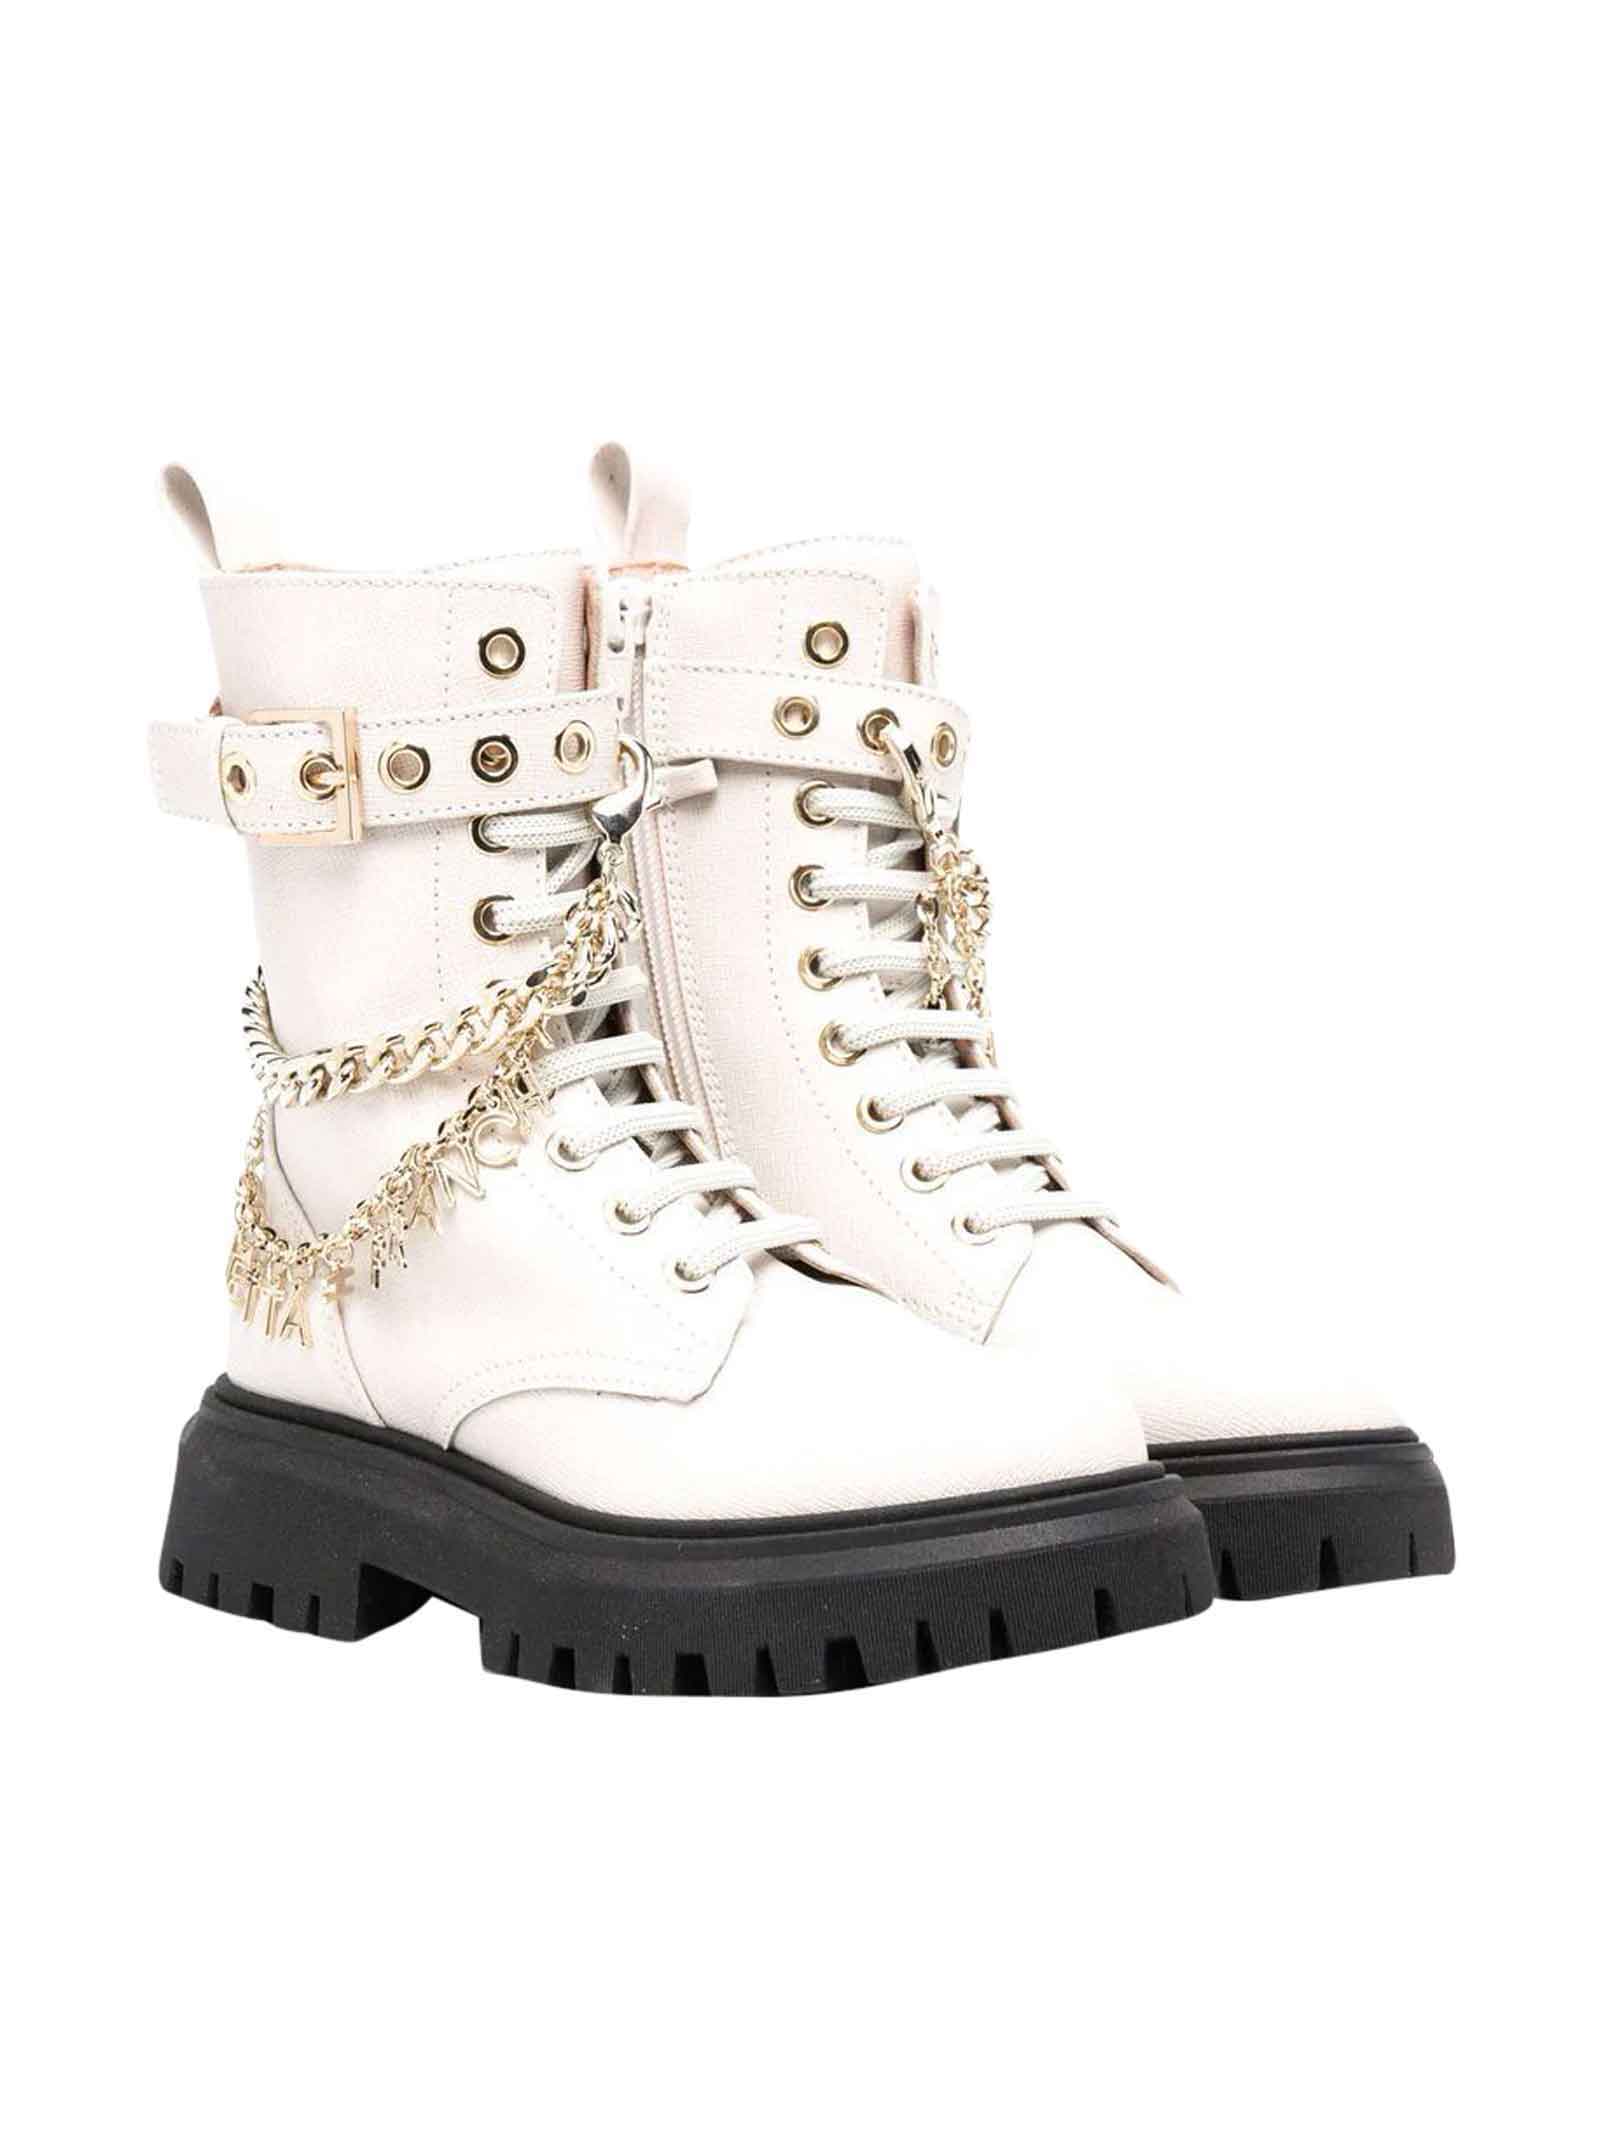 Elisabetta Franchi La Mia Bambina White Teen Boots With Chains, Round Tip And Laces Kids